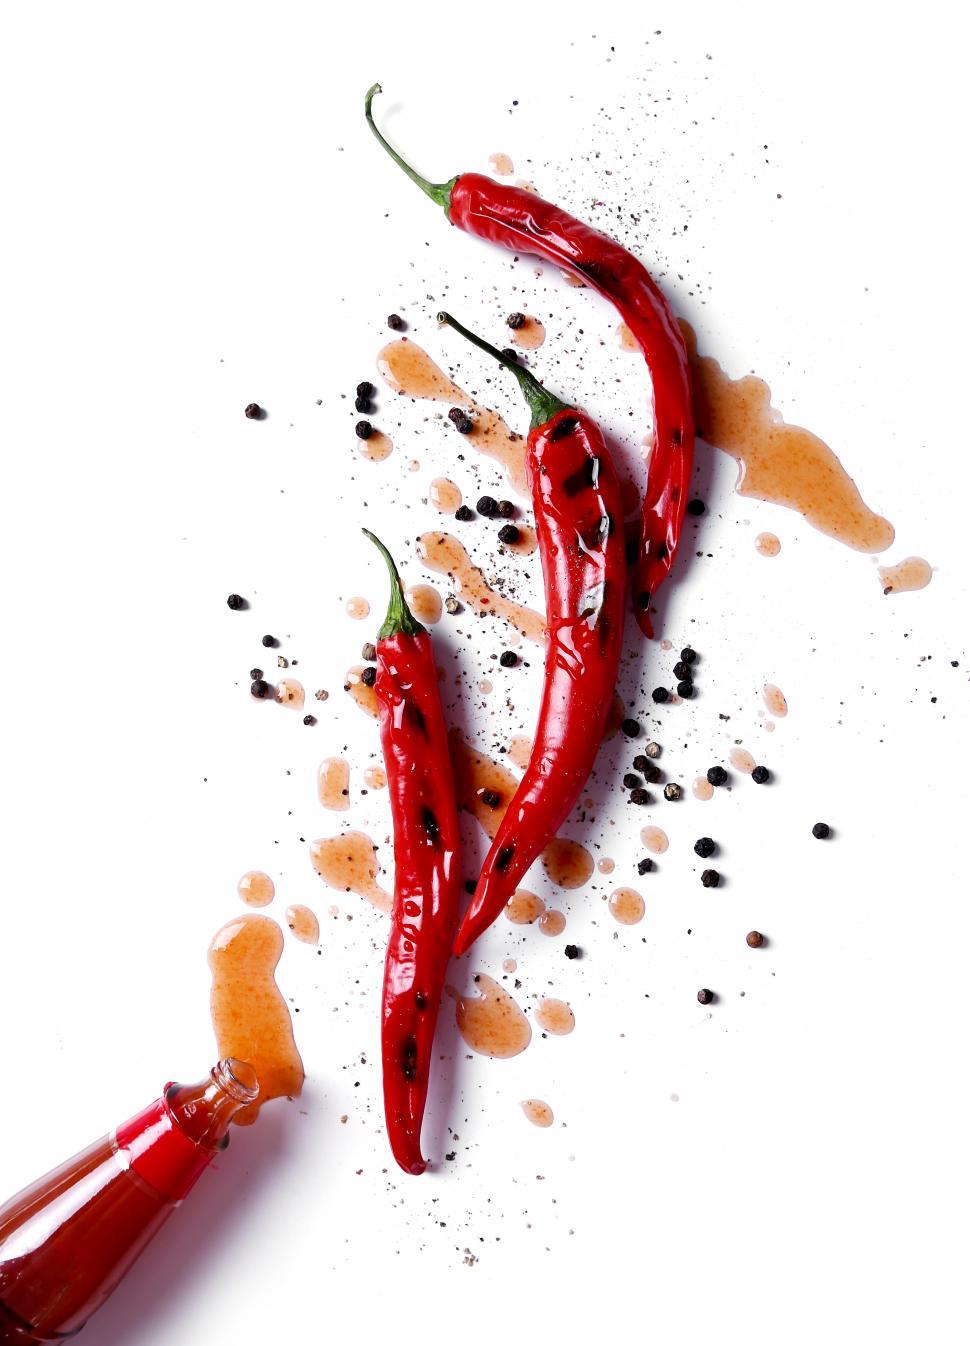 Free Image of Spice chili peppers, hot sauce and pepper 